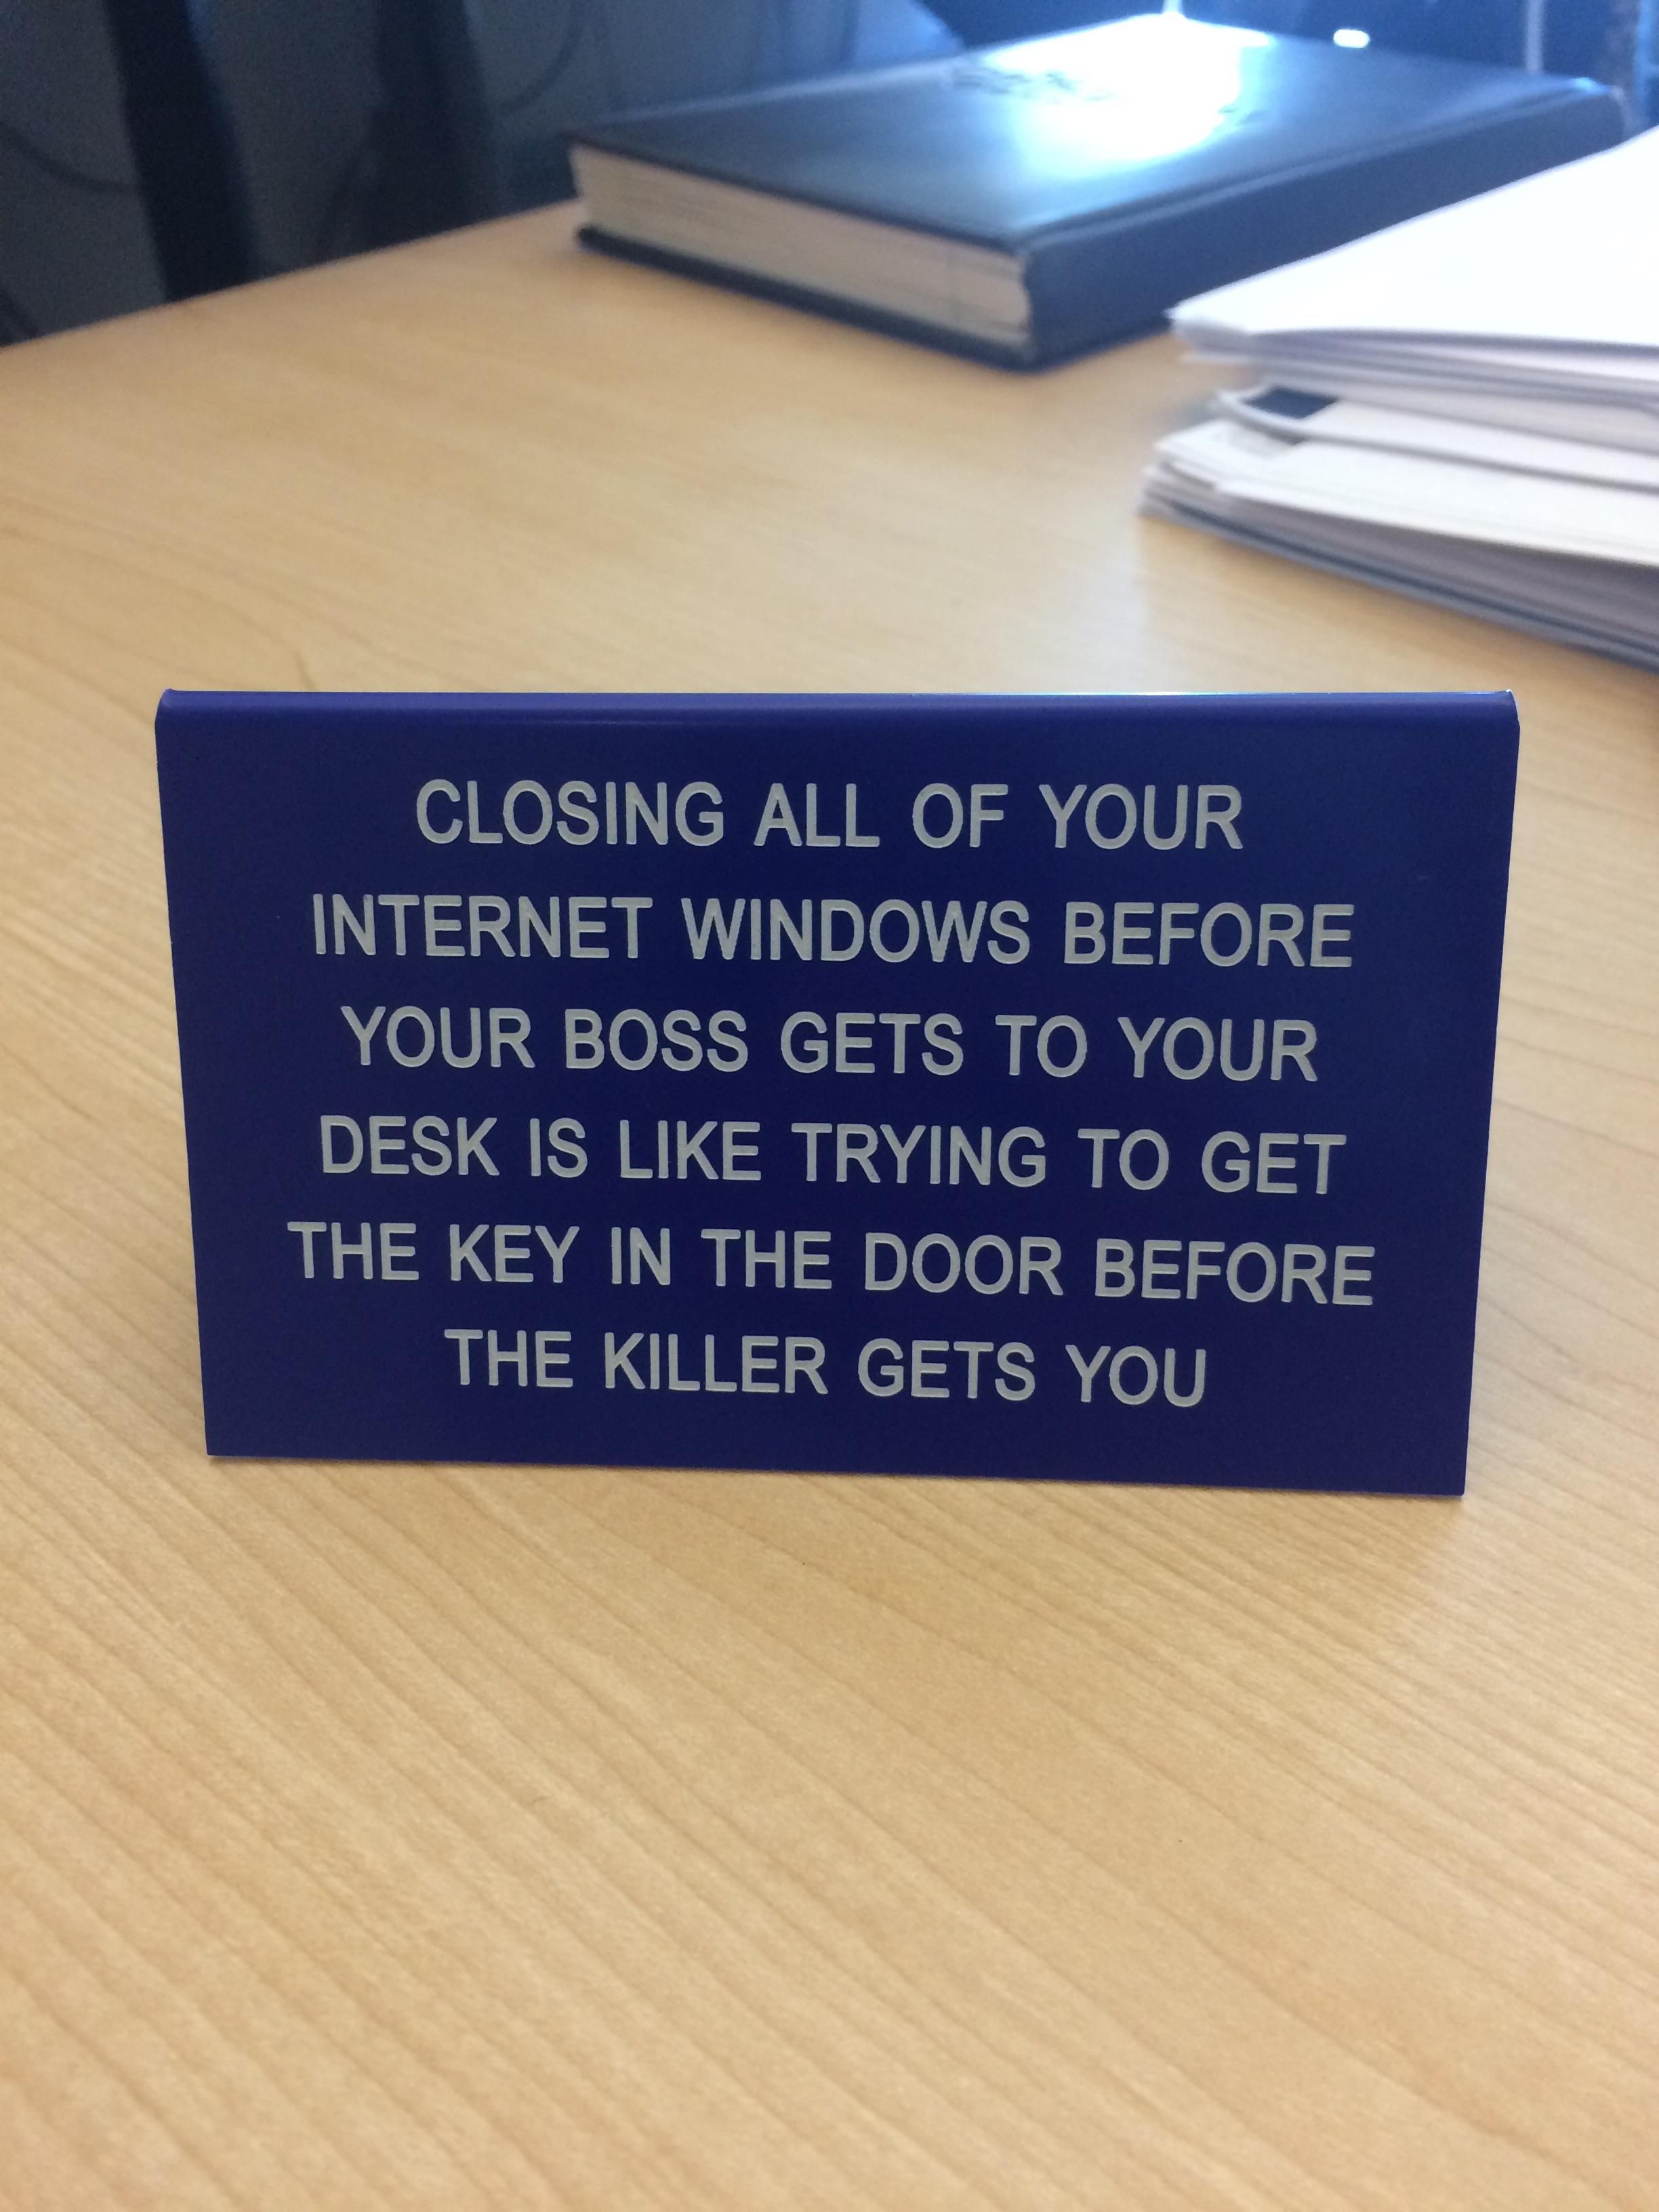 Walked in my bosses office and saw this sign.